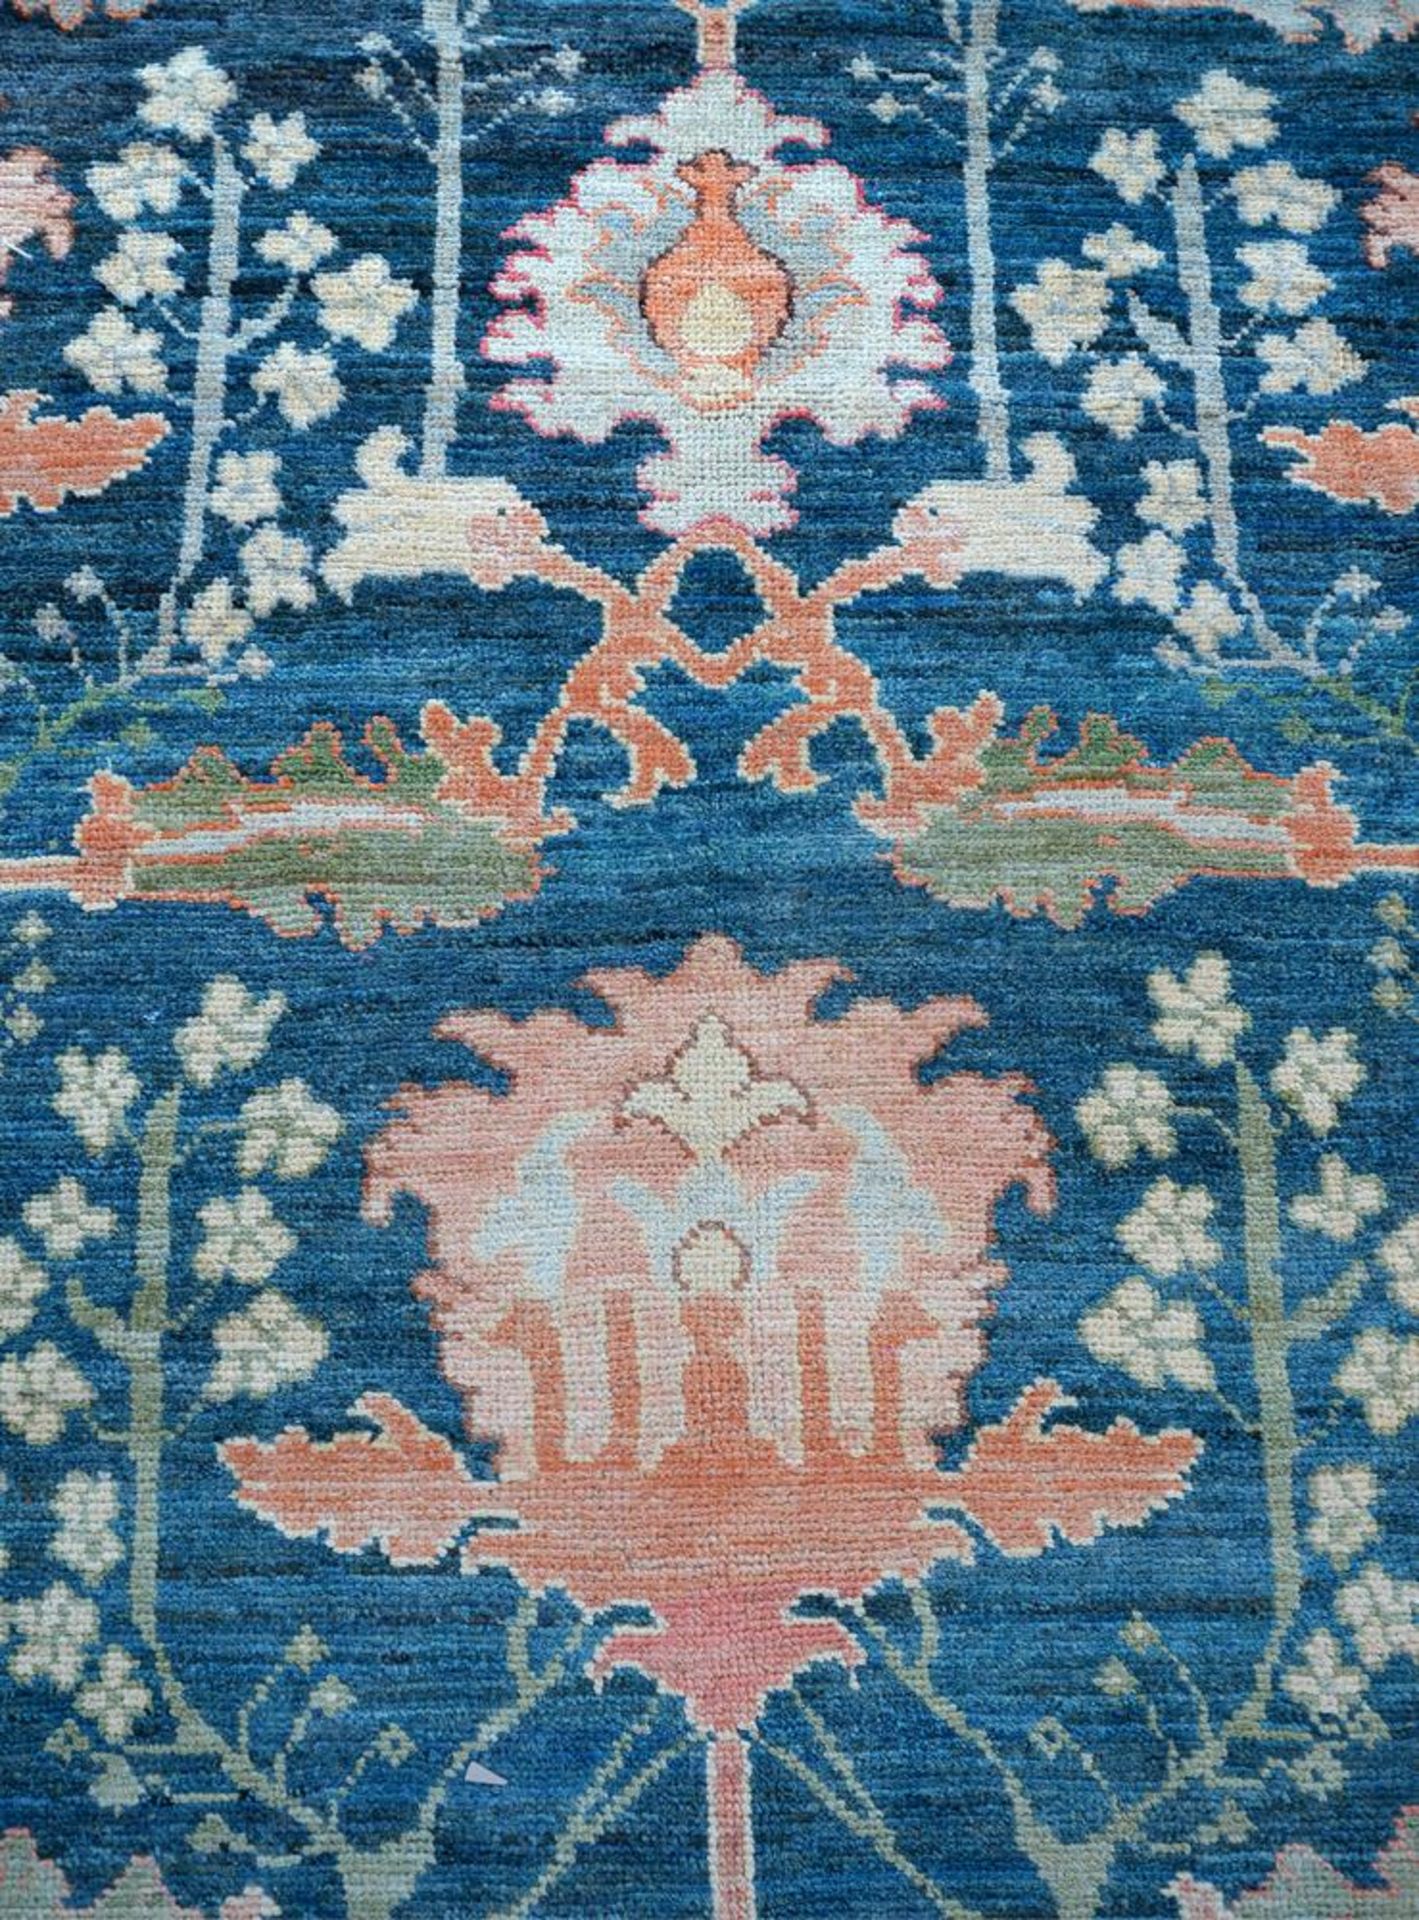 A WOVEN CARPET, IN ARTS & CRAFTS STYLE, AFTER A DESIGN BY CFA VOYSEY, approximately 540 x 360cm - Image 2 of 3